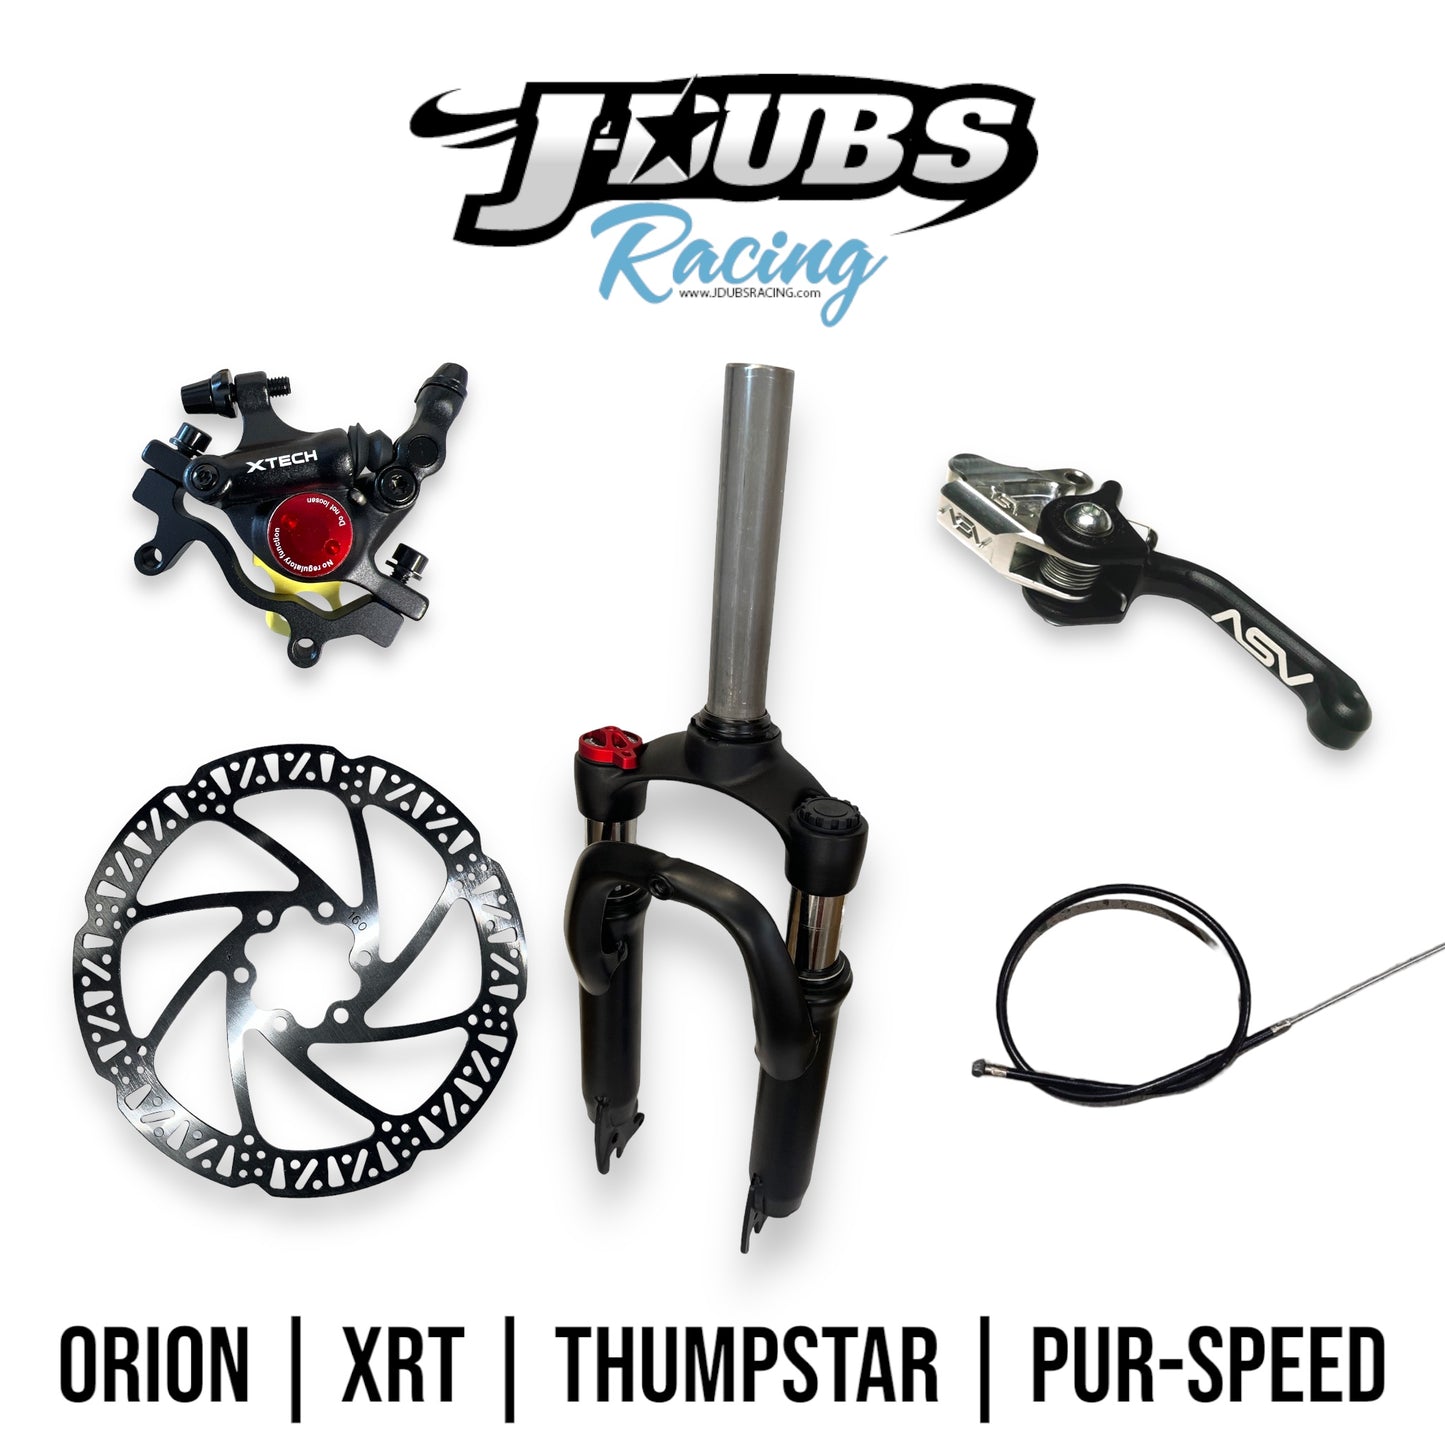 Build Your Own Suspension Forks and Front Brake Kit - Orion | XRT | Pur-Speed | Thumpstar